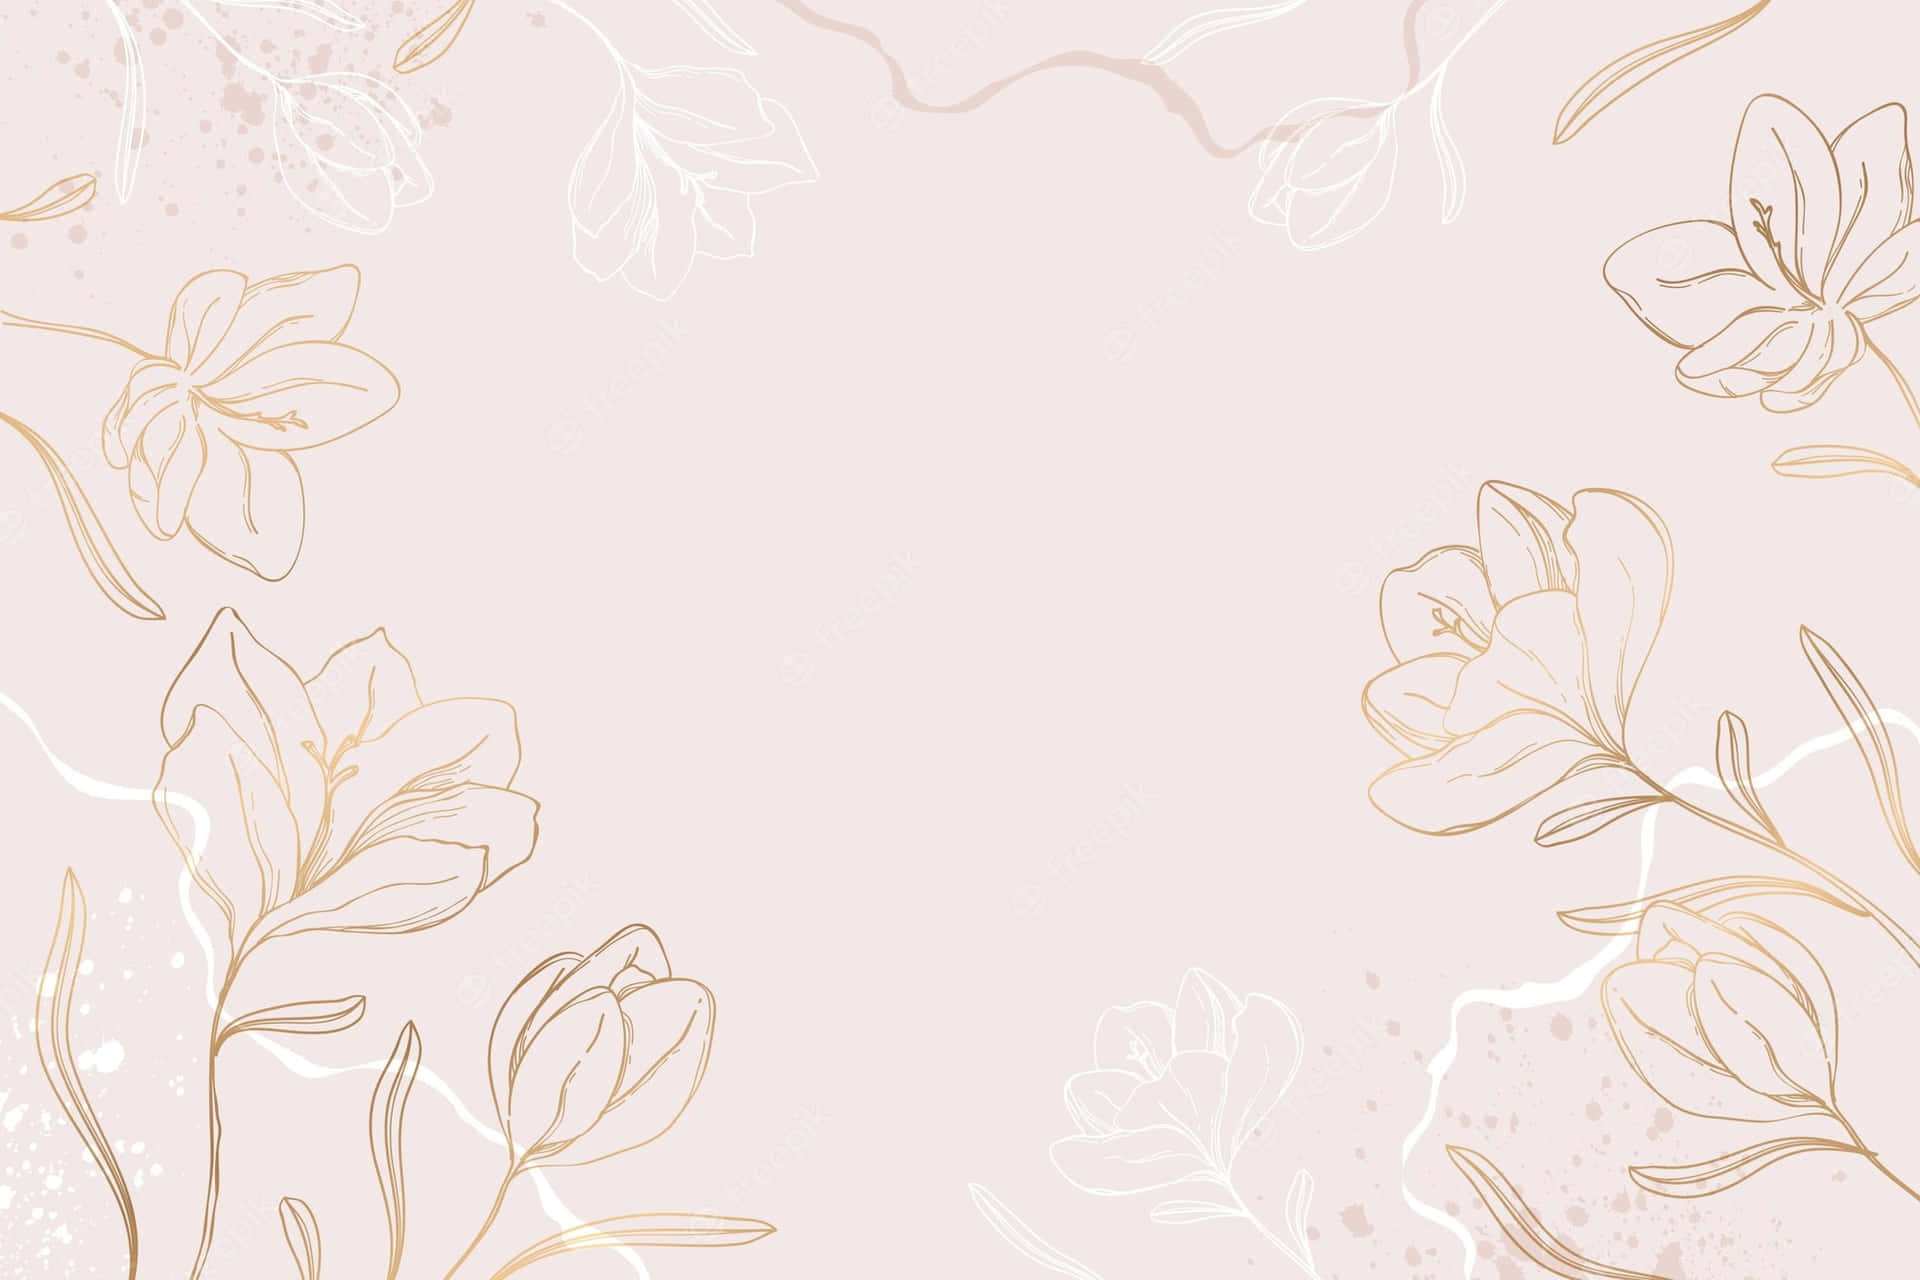 A vibrant watercolor floral background